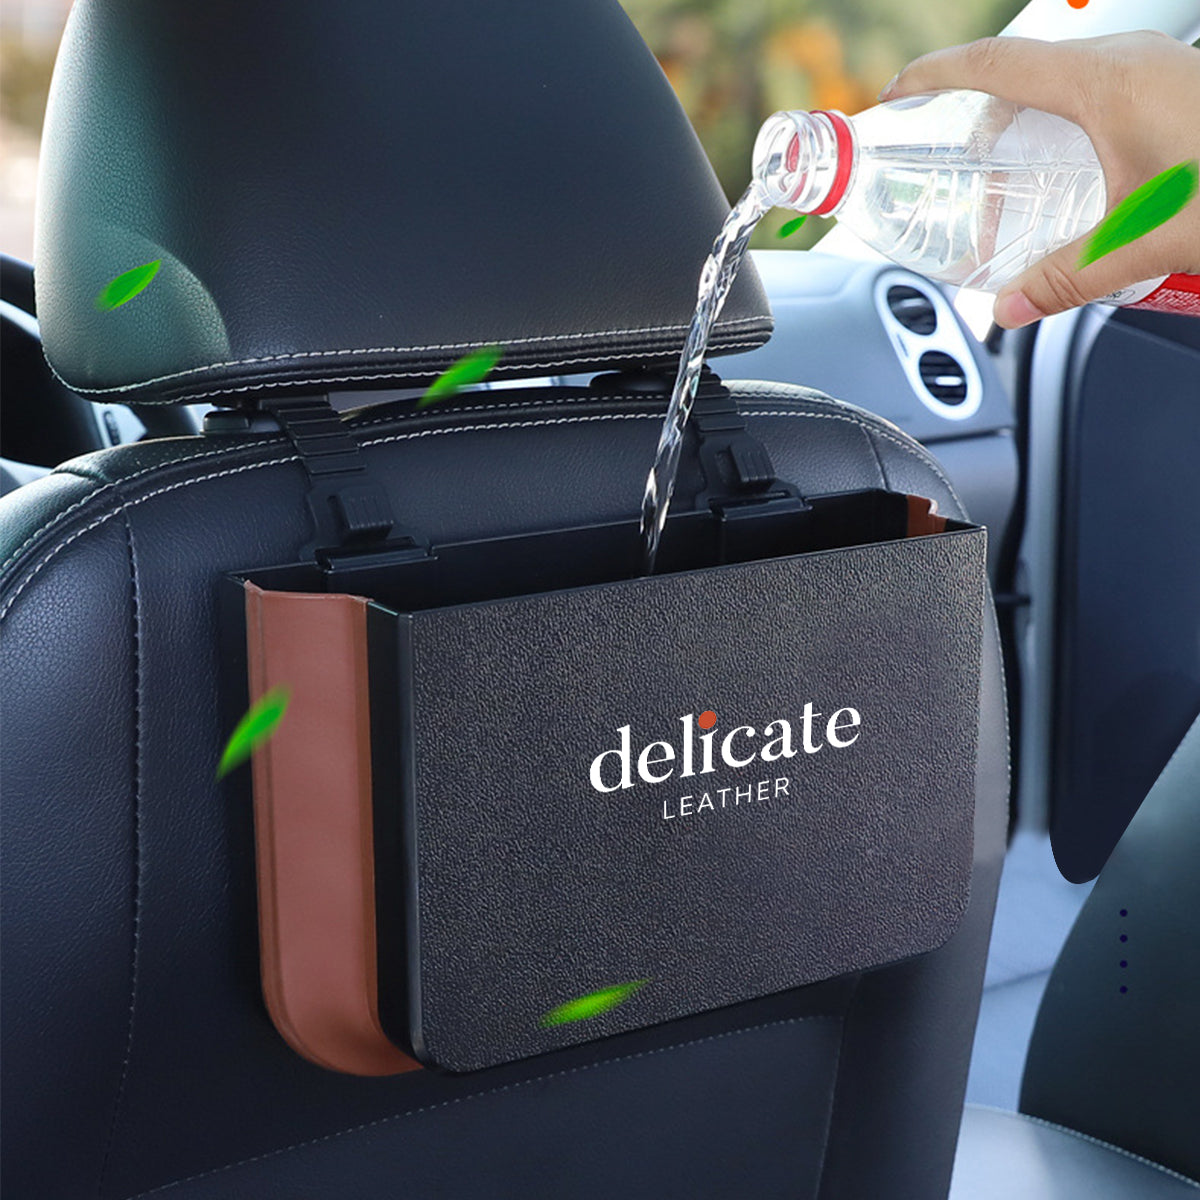 Delicate Leather Hanging Waterproof Car Trash can-Foldable, Custom For Your Cars, Waterproof, and Equipped with Cup Holders and Trays. Multi-Purpose, Car Accessories TY11992